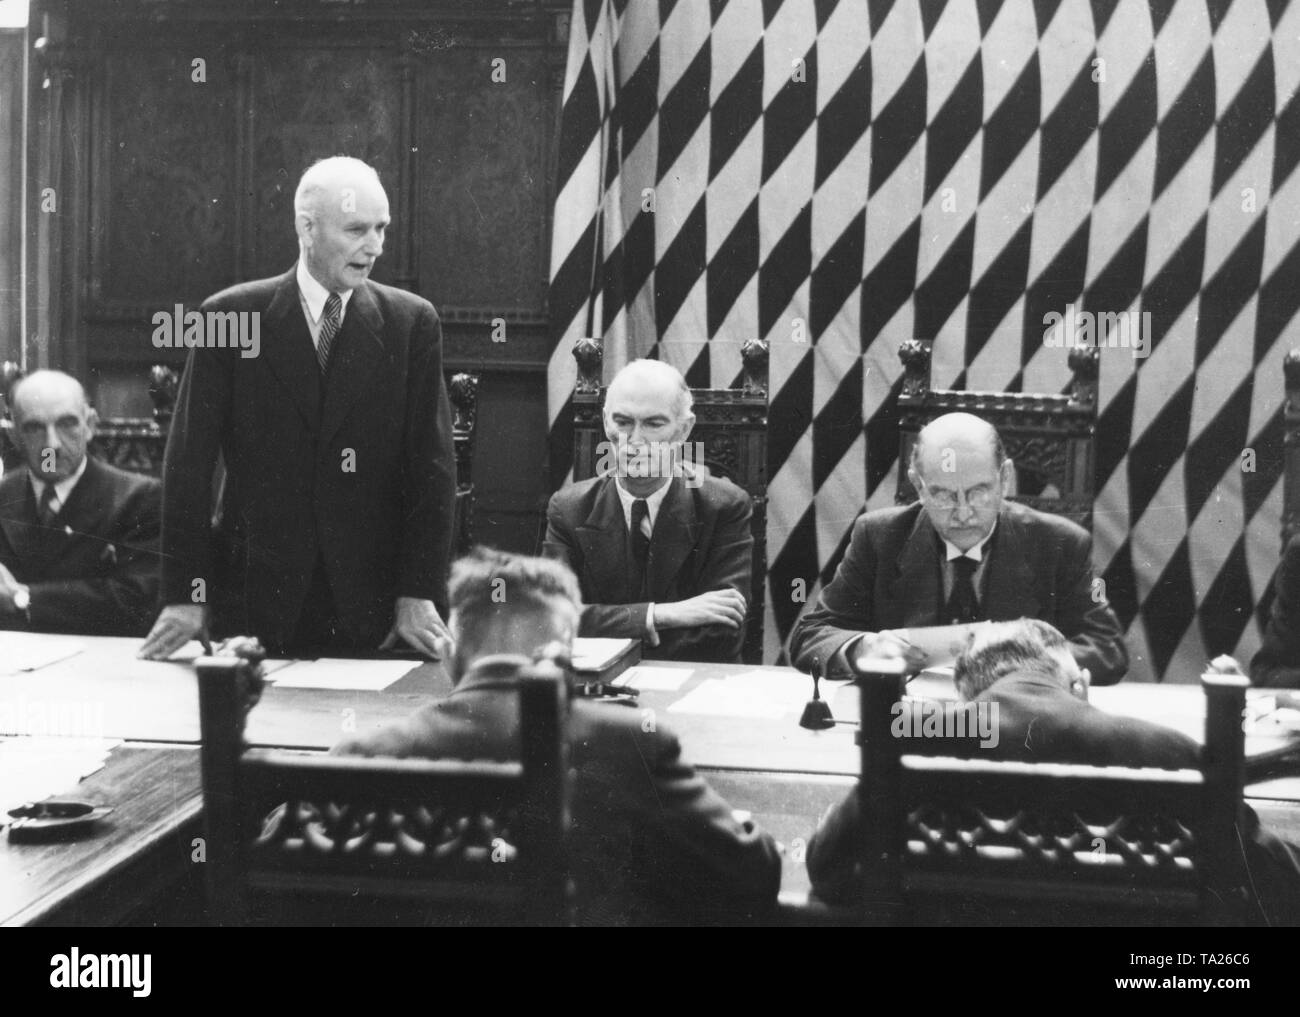 During the first council meeting in the small meeting hall of the Munich Town Hall, police president Pitzer (?) holds a speech. On the far right Lord Mayor Karl Scharnagl, who was appointed by the Allies. In the center Franz Stadelmayer, second mayor and head of the city administration. Stock Photo